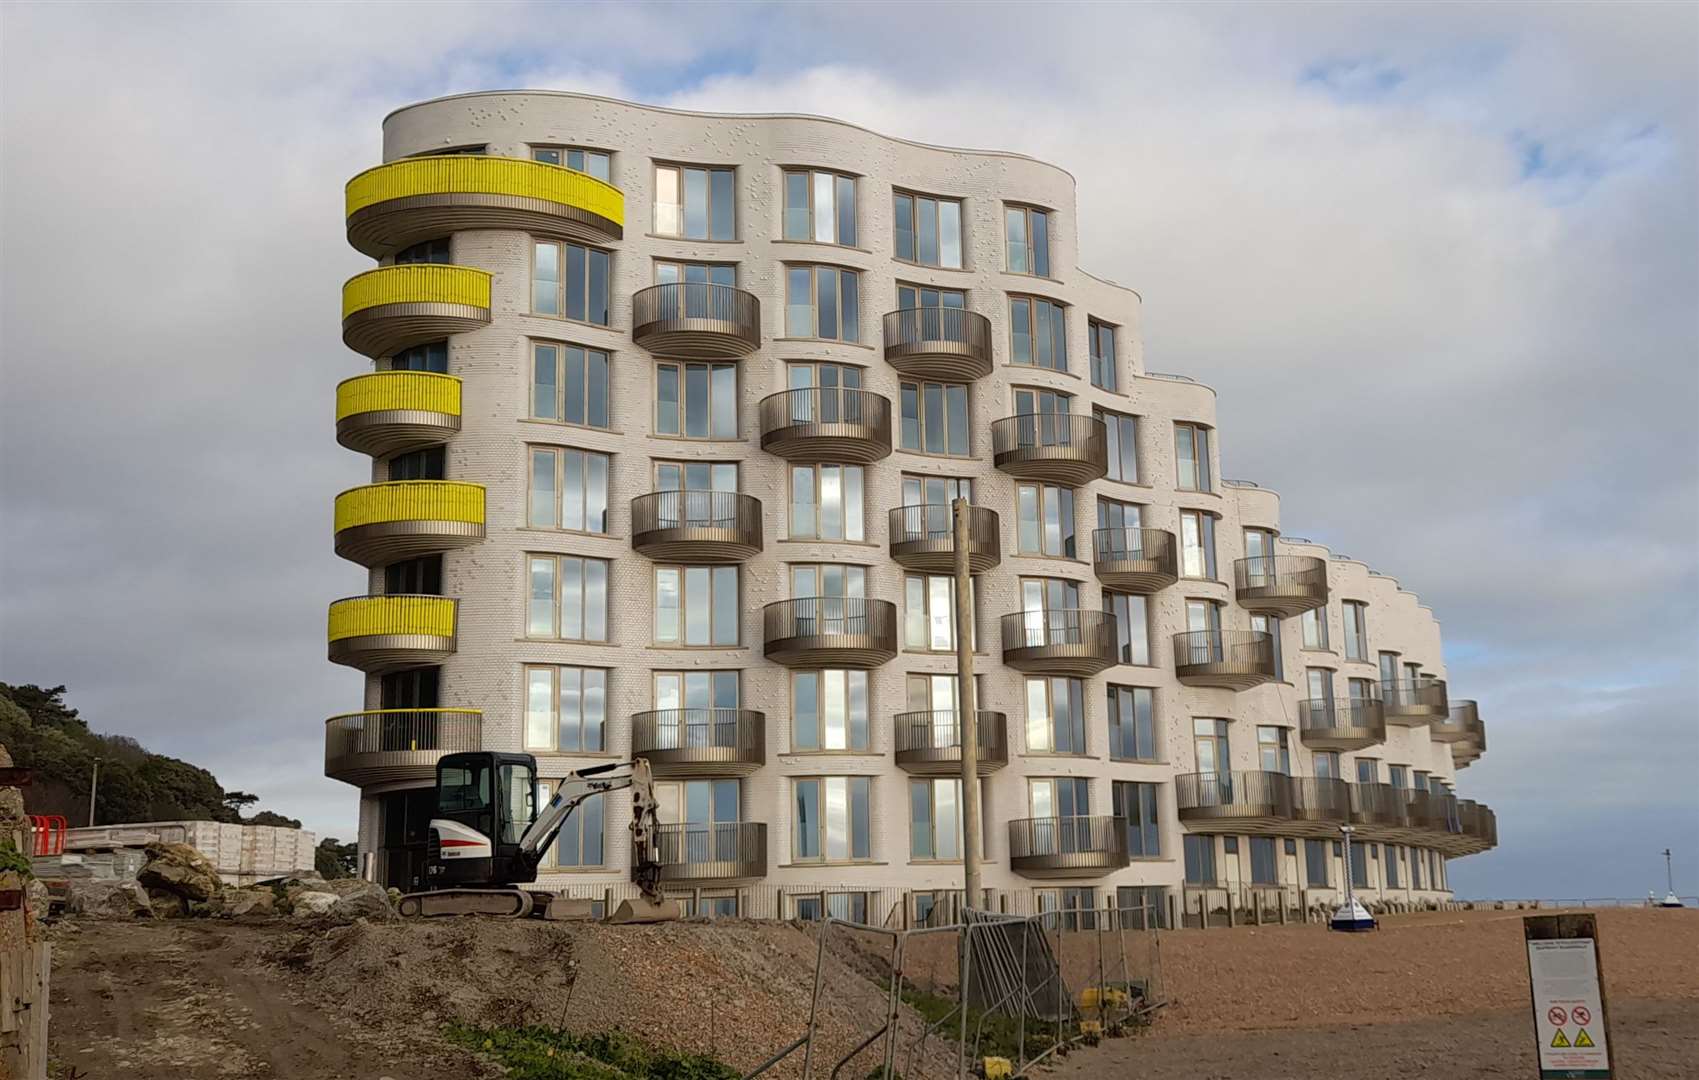 Townhouses at Shoreline Crescent in Folkestone start at £1.85 million and flats at £430,000